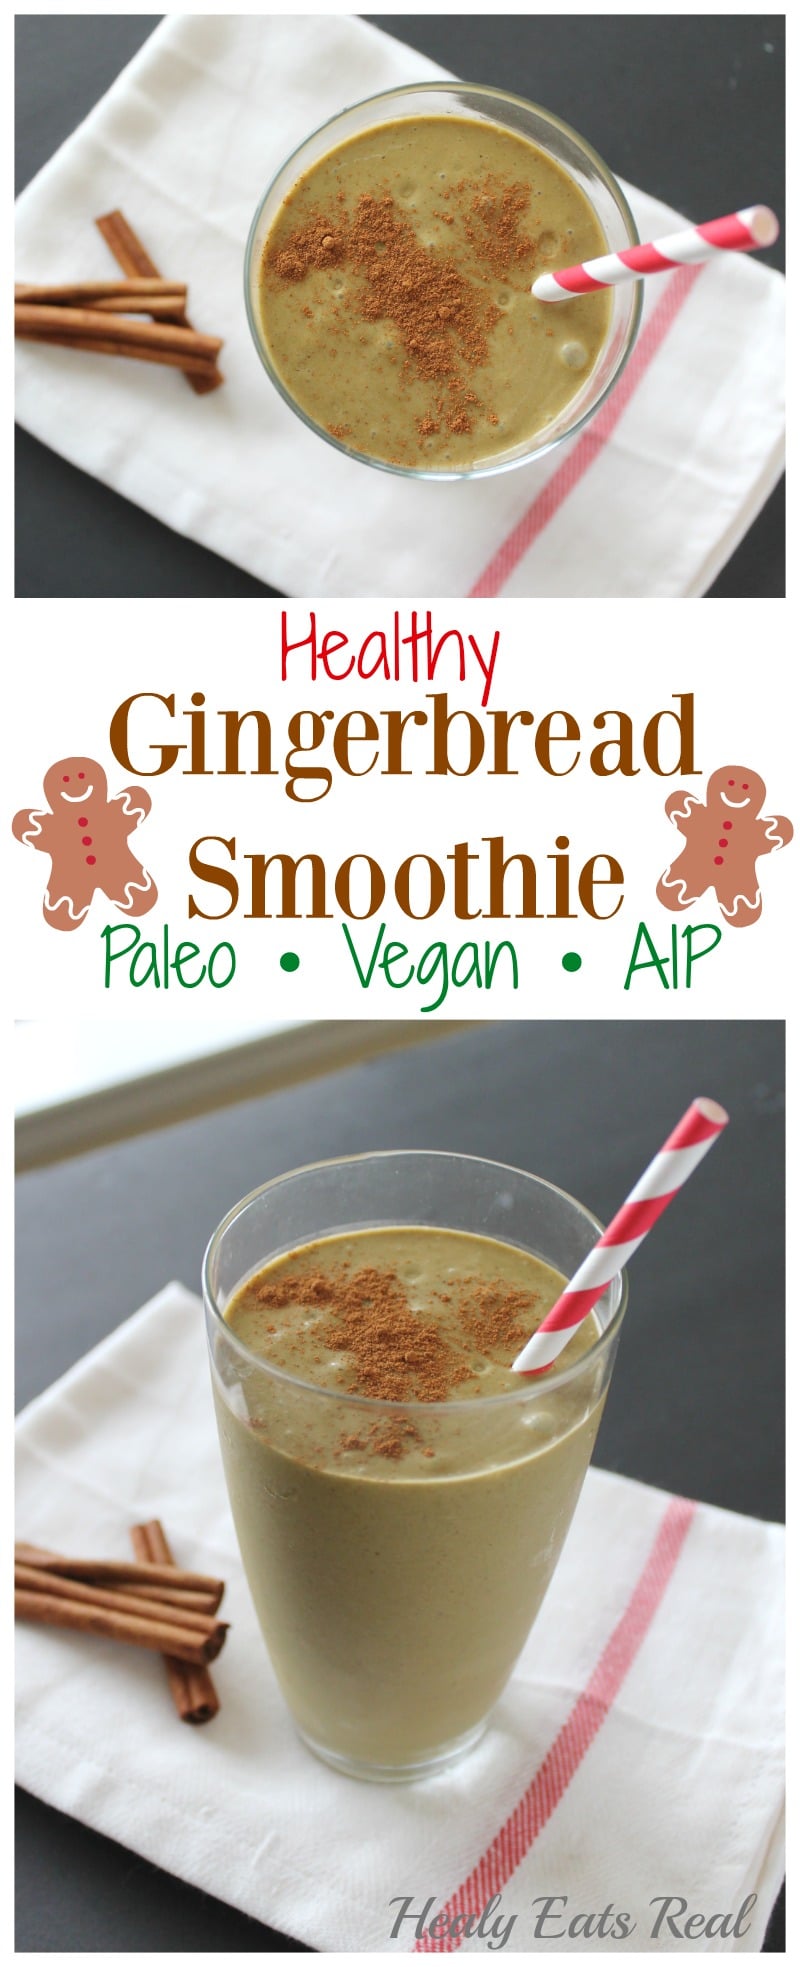 Gingerbread Smoothie Recipe